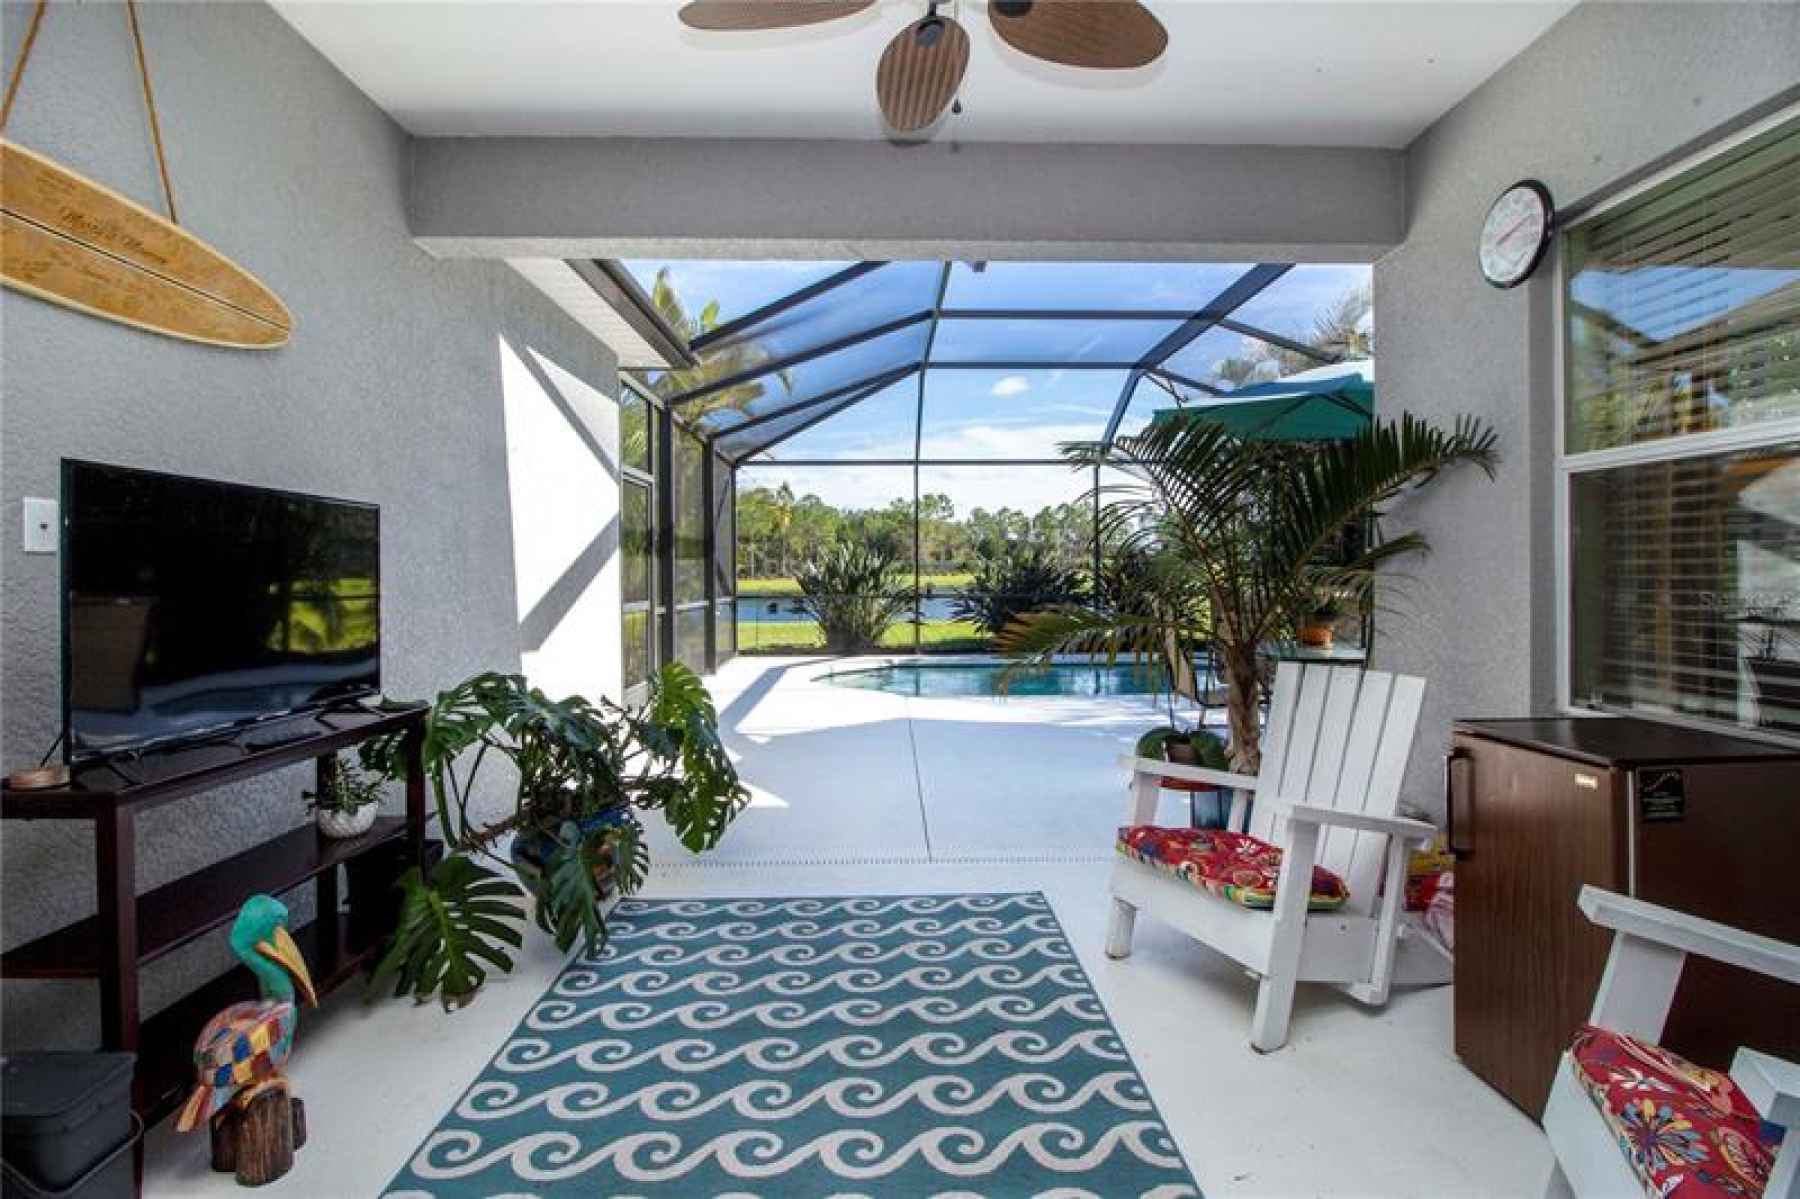 Covered lanai- great protected outdoor space